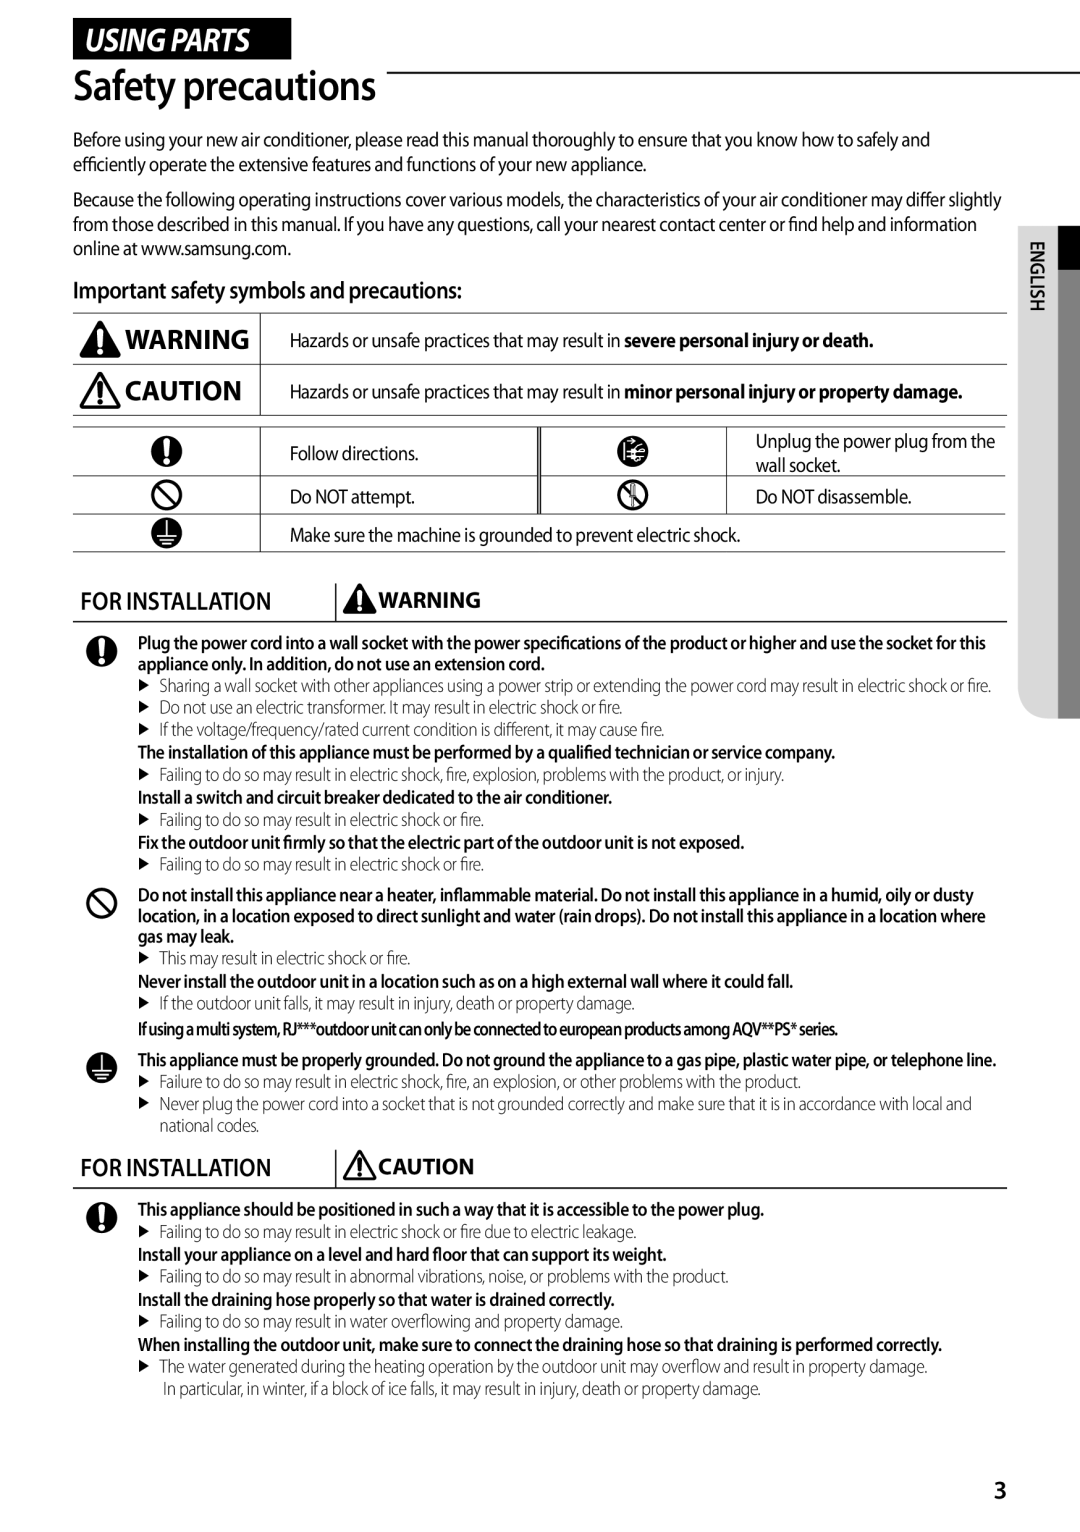 Samsung AQV12PWAN Safety precautions, Using Parts, Important safety symbols and precautions, For Installation, English 